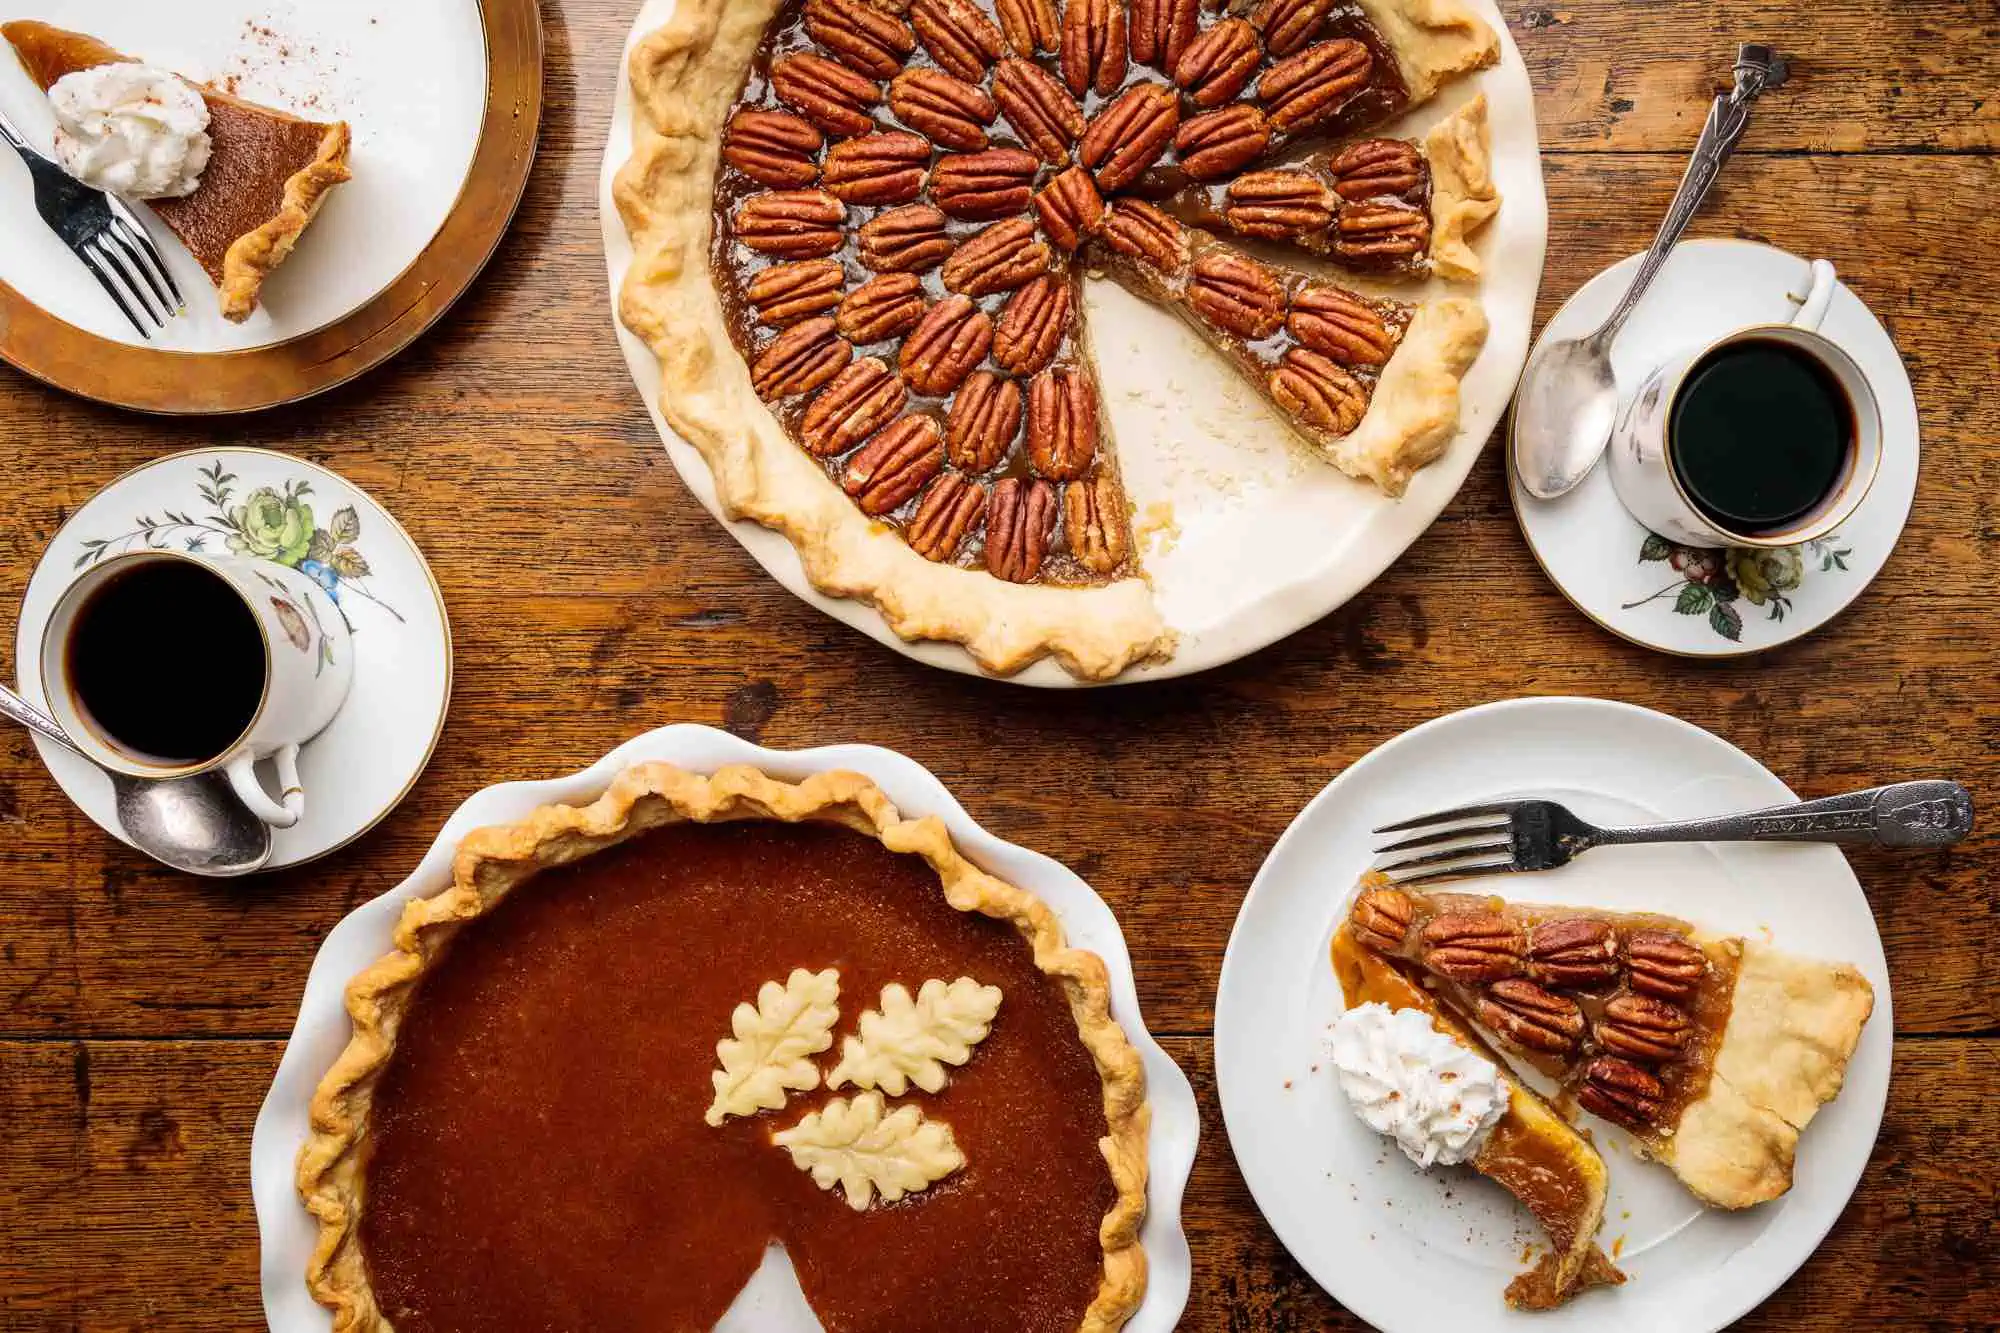 Vegan Thanksgiving Dessert Recipes & Pies Served on a Table With Hot Coffee